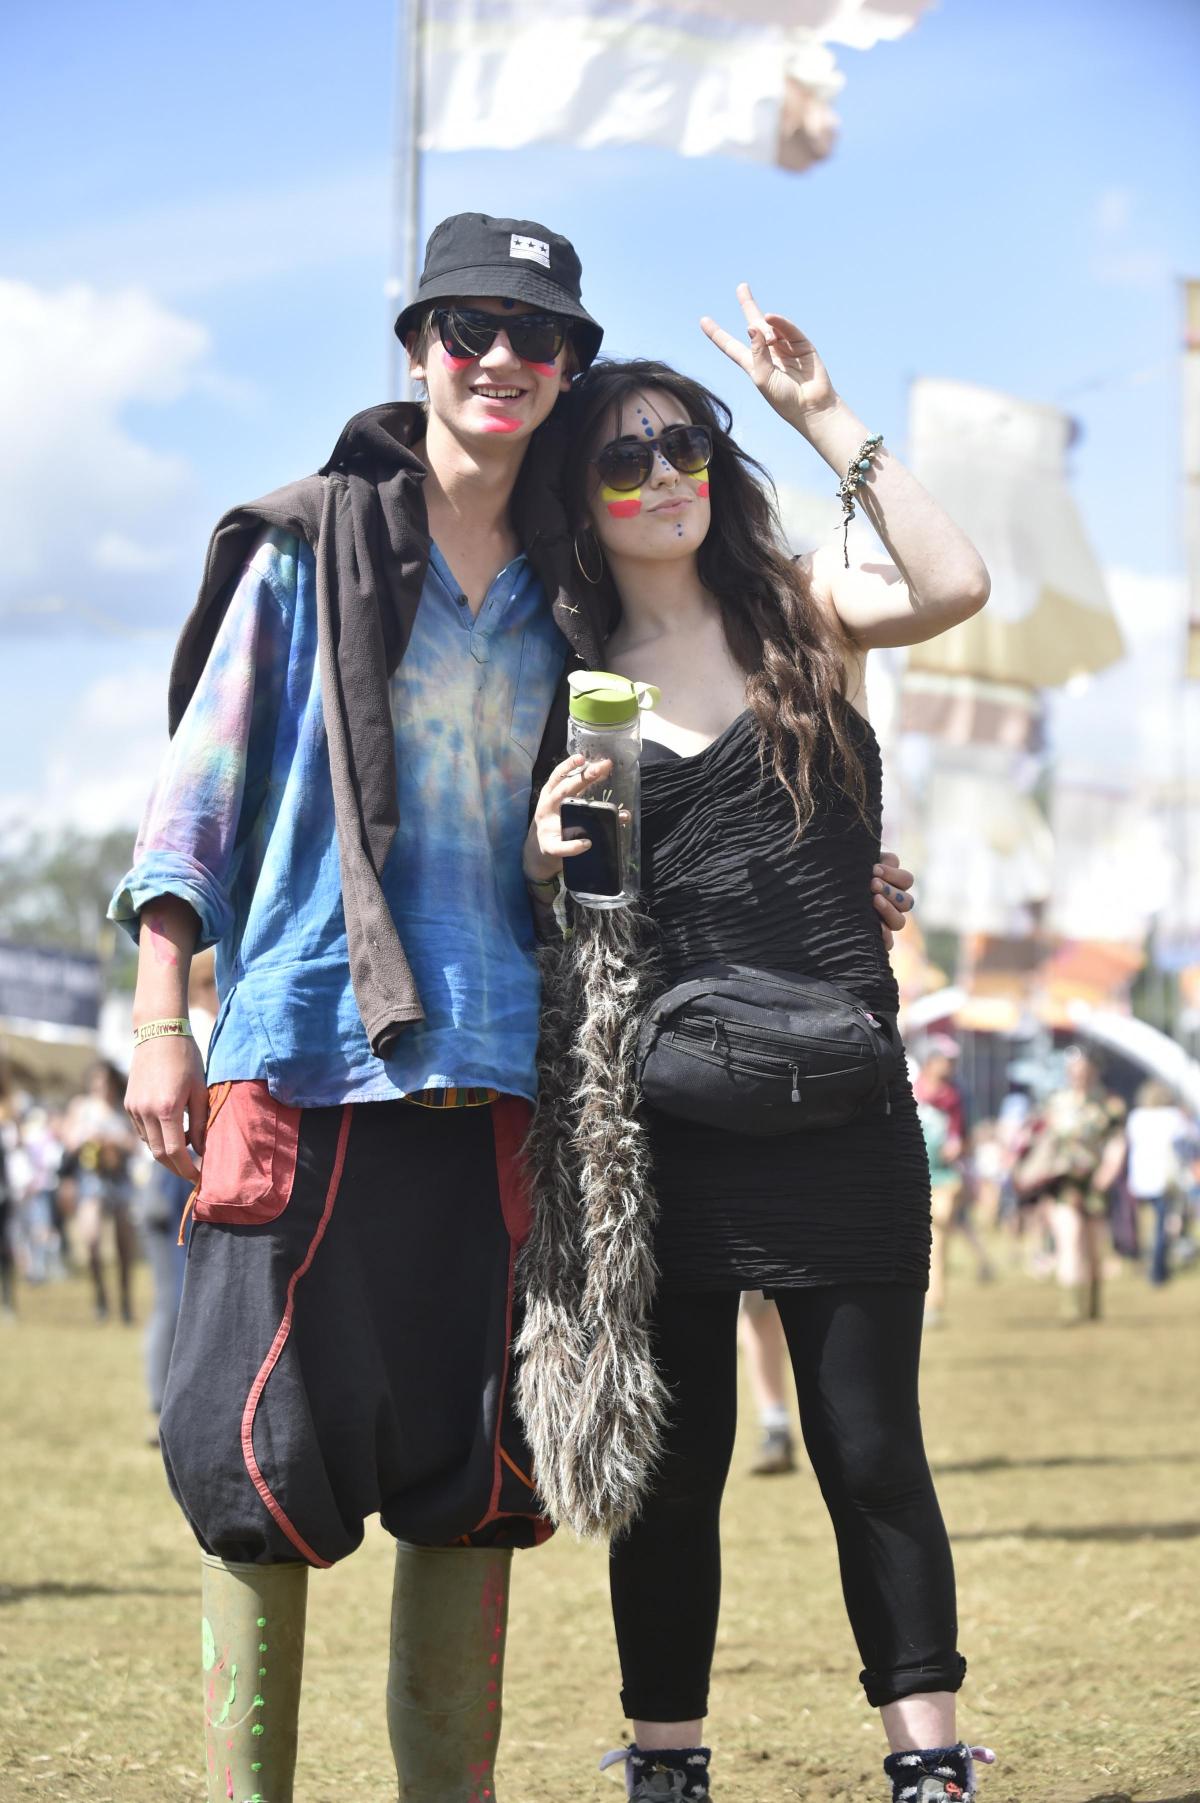 Scenes from the WOMAD festival at Charlton Park, near Malmesbury